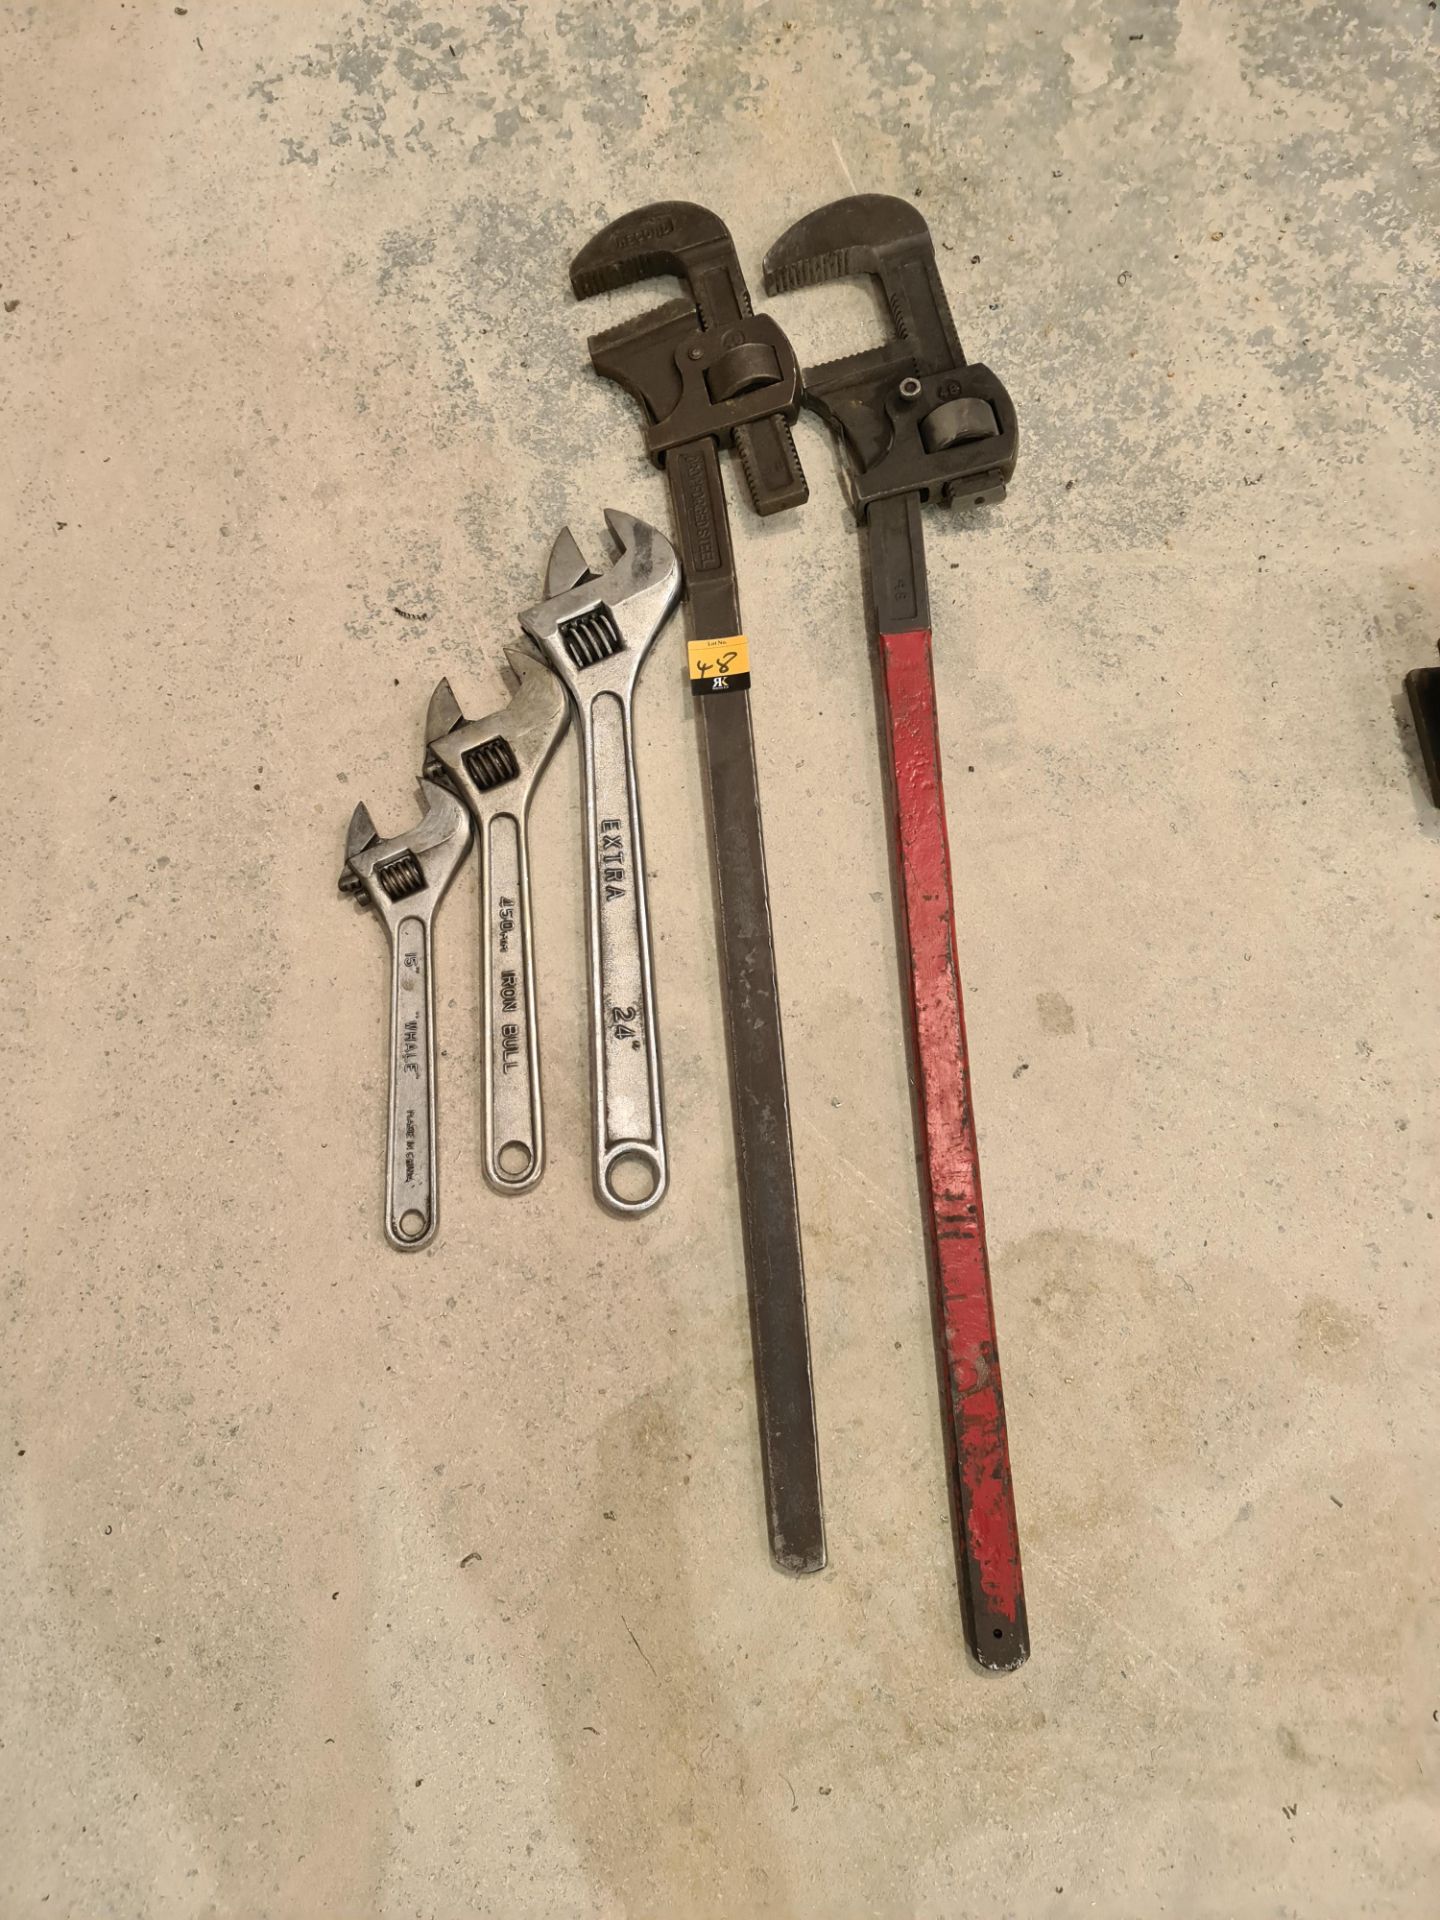 5 off assorted wrenches & adjustable spanners